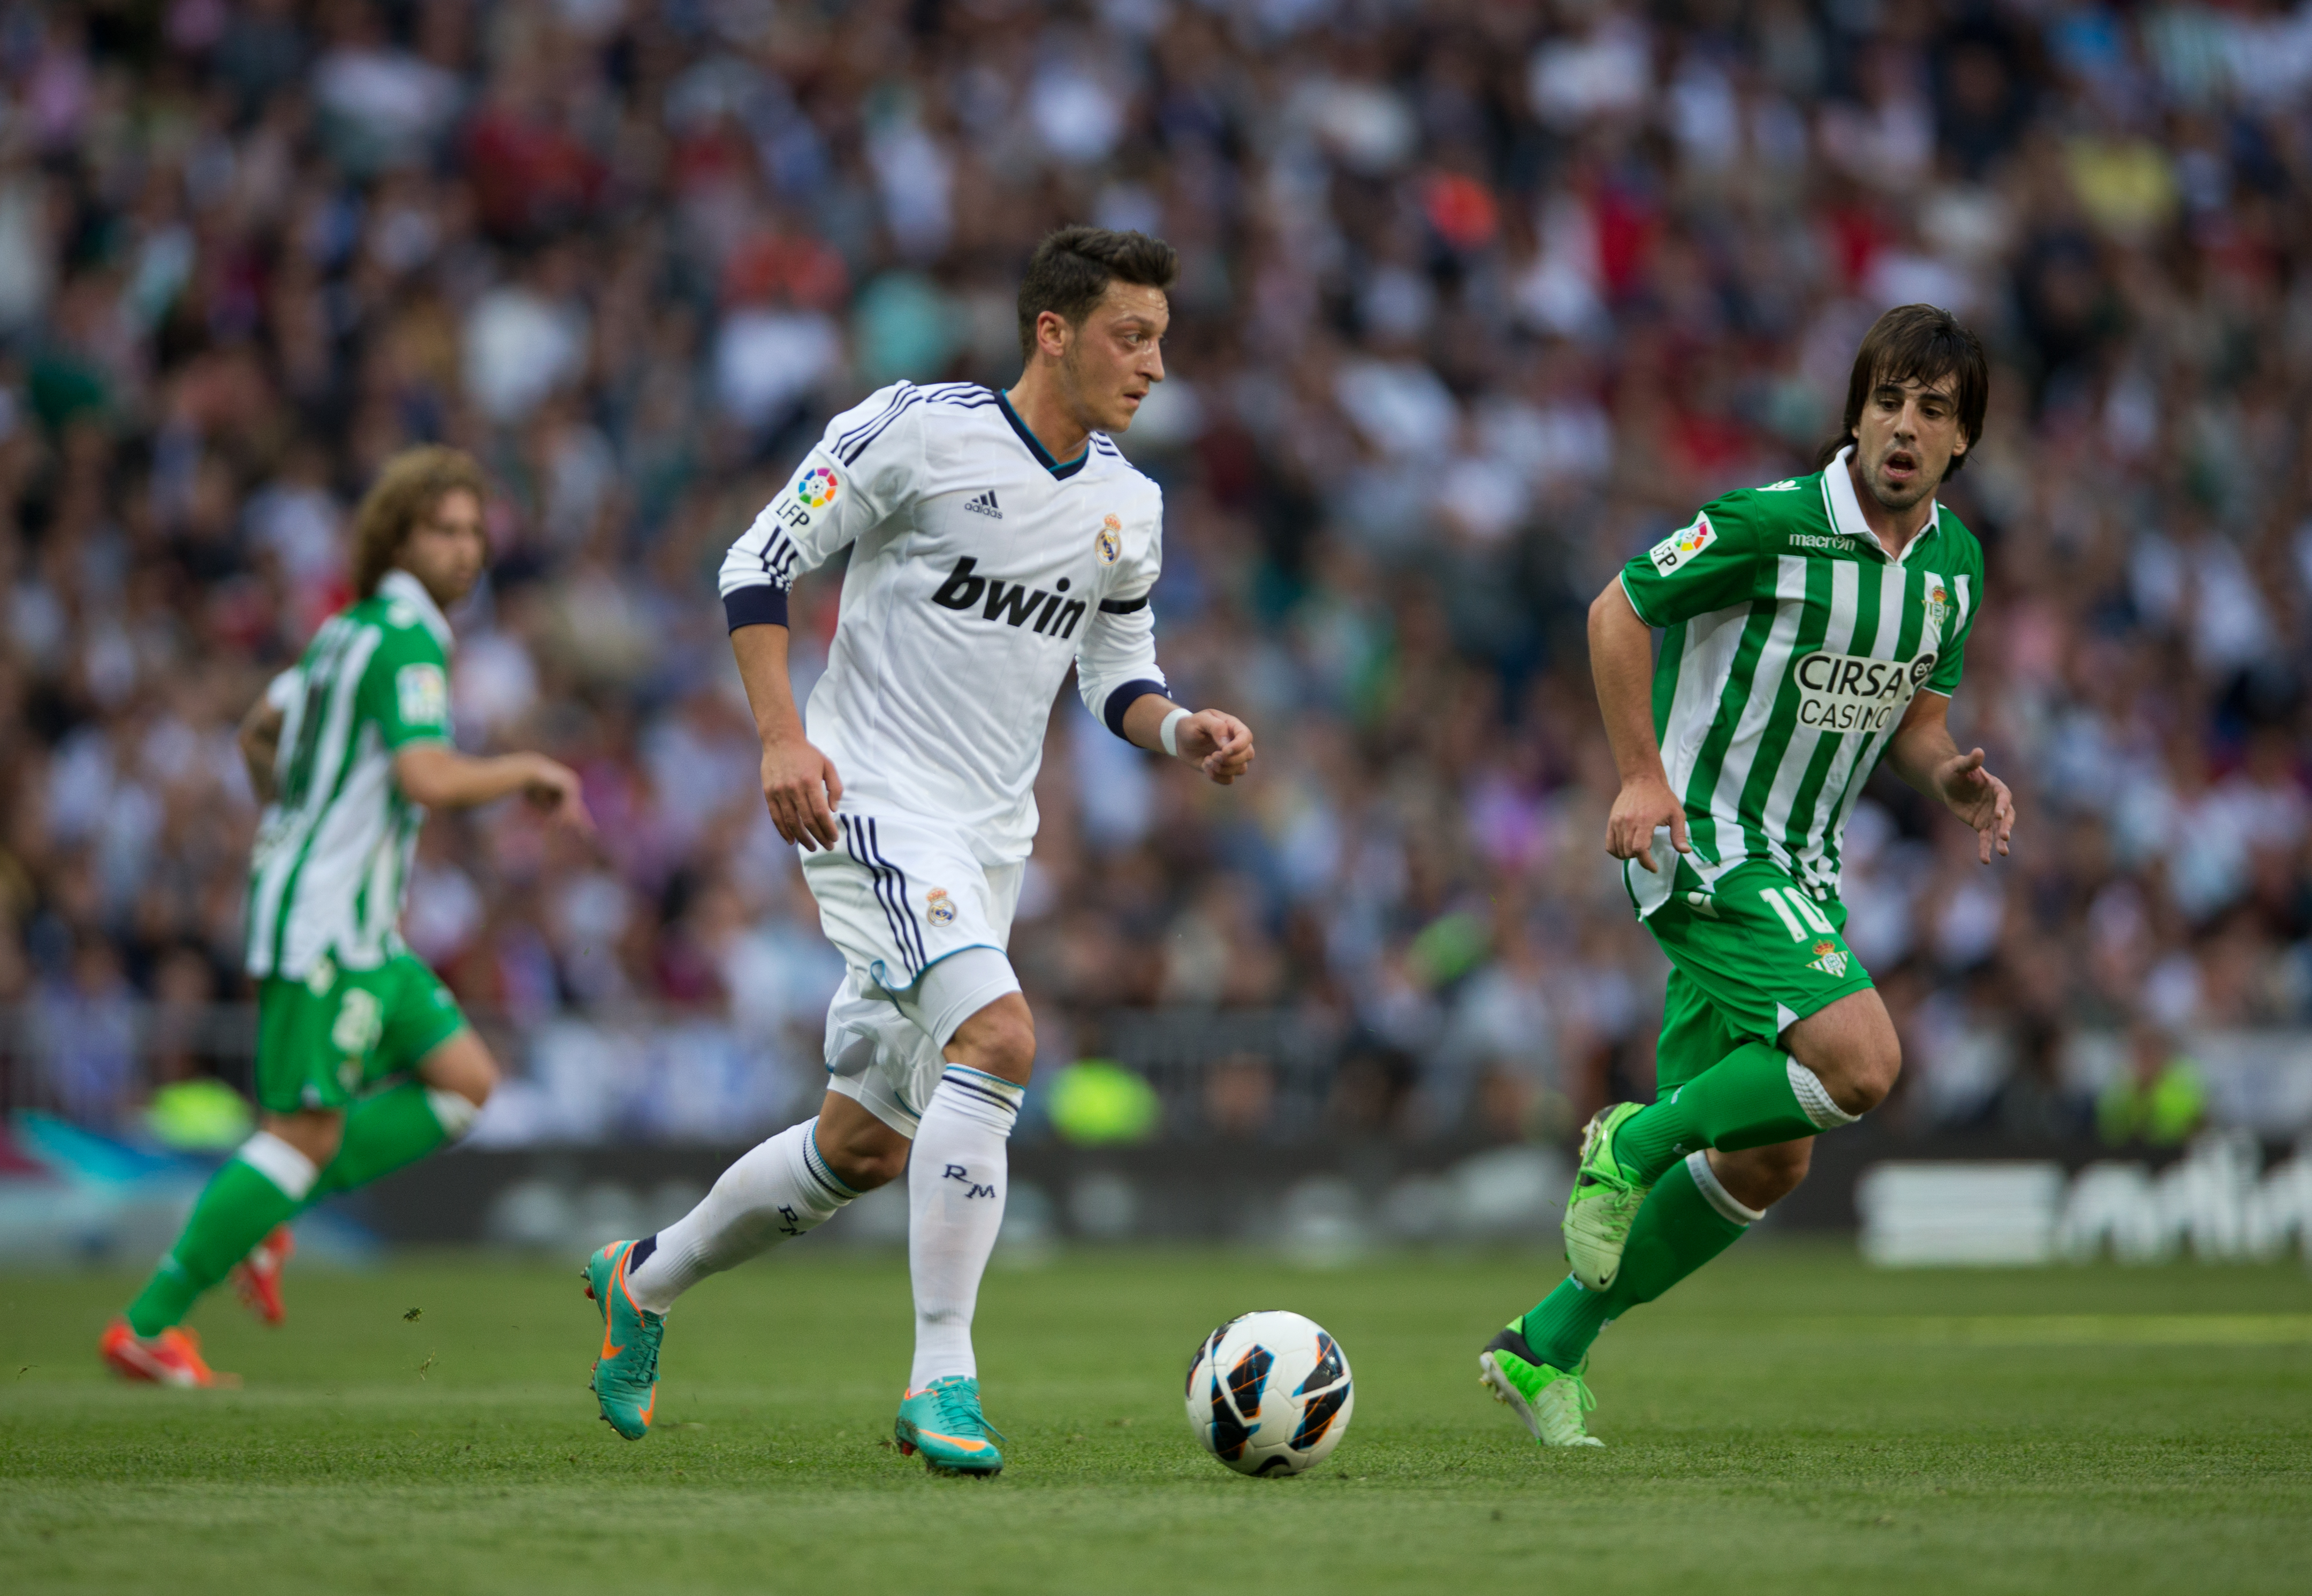 Mesut Ozil on the ball for Real Madrid against Real Betis in April 2013.